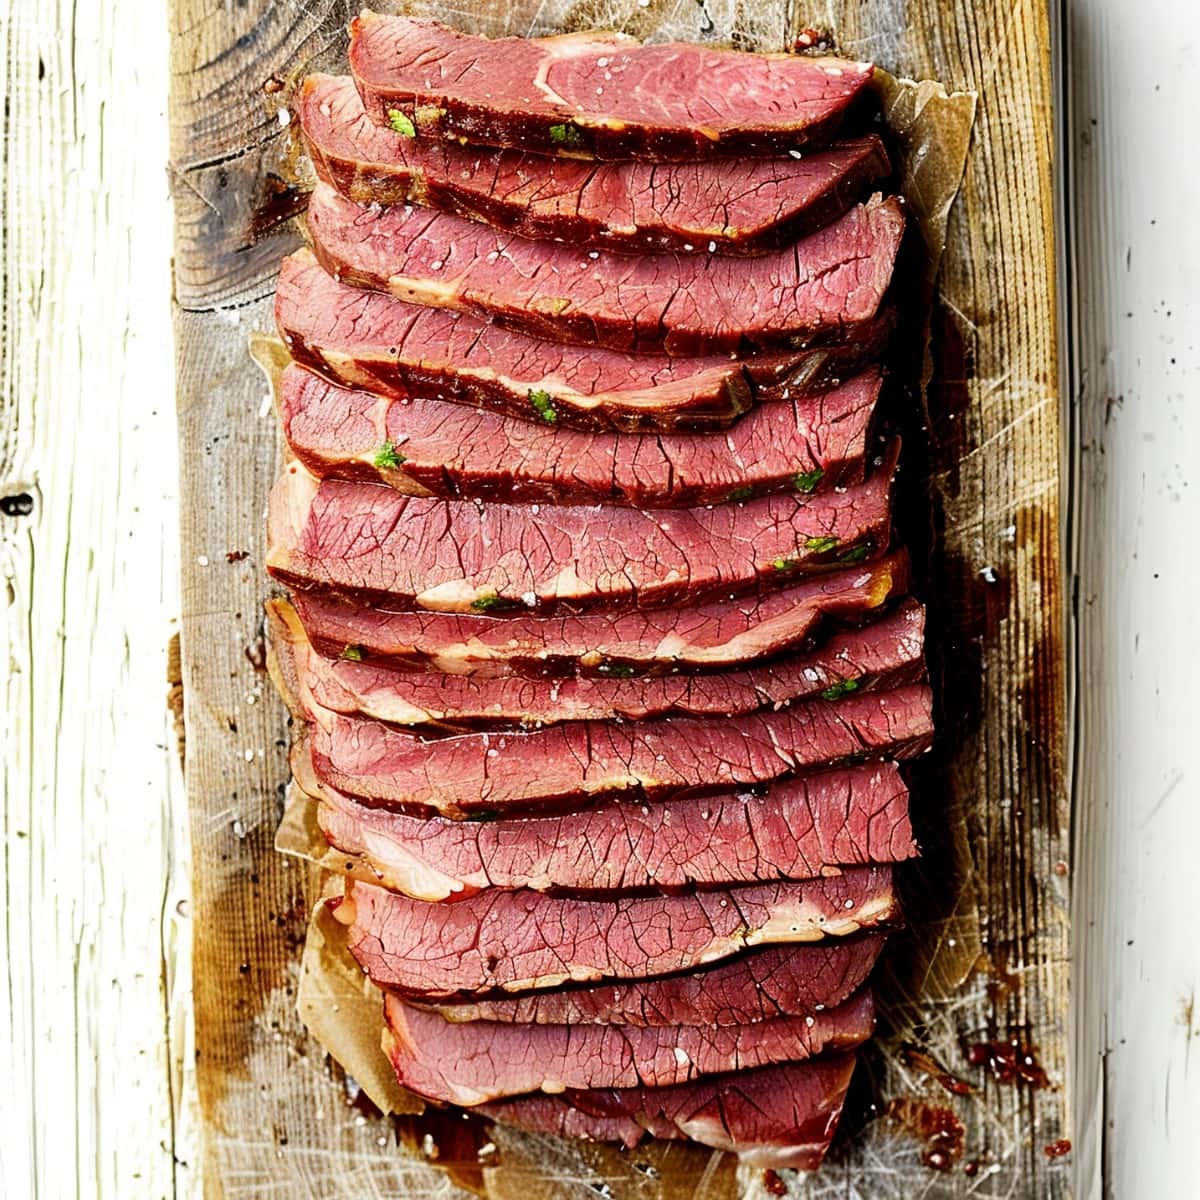 Sliced beef brisket on a wooden chopping board.